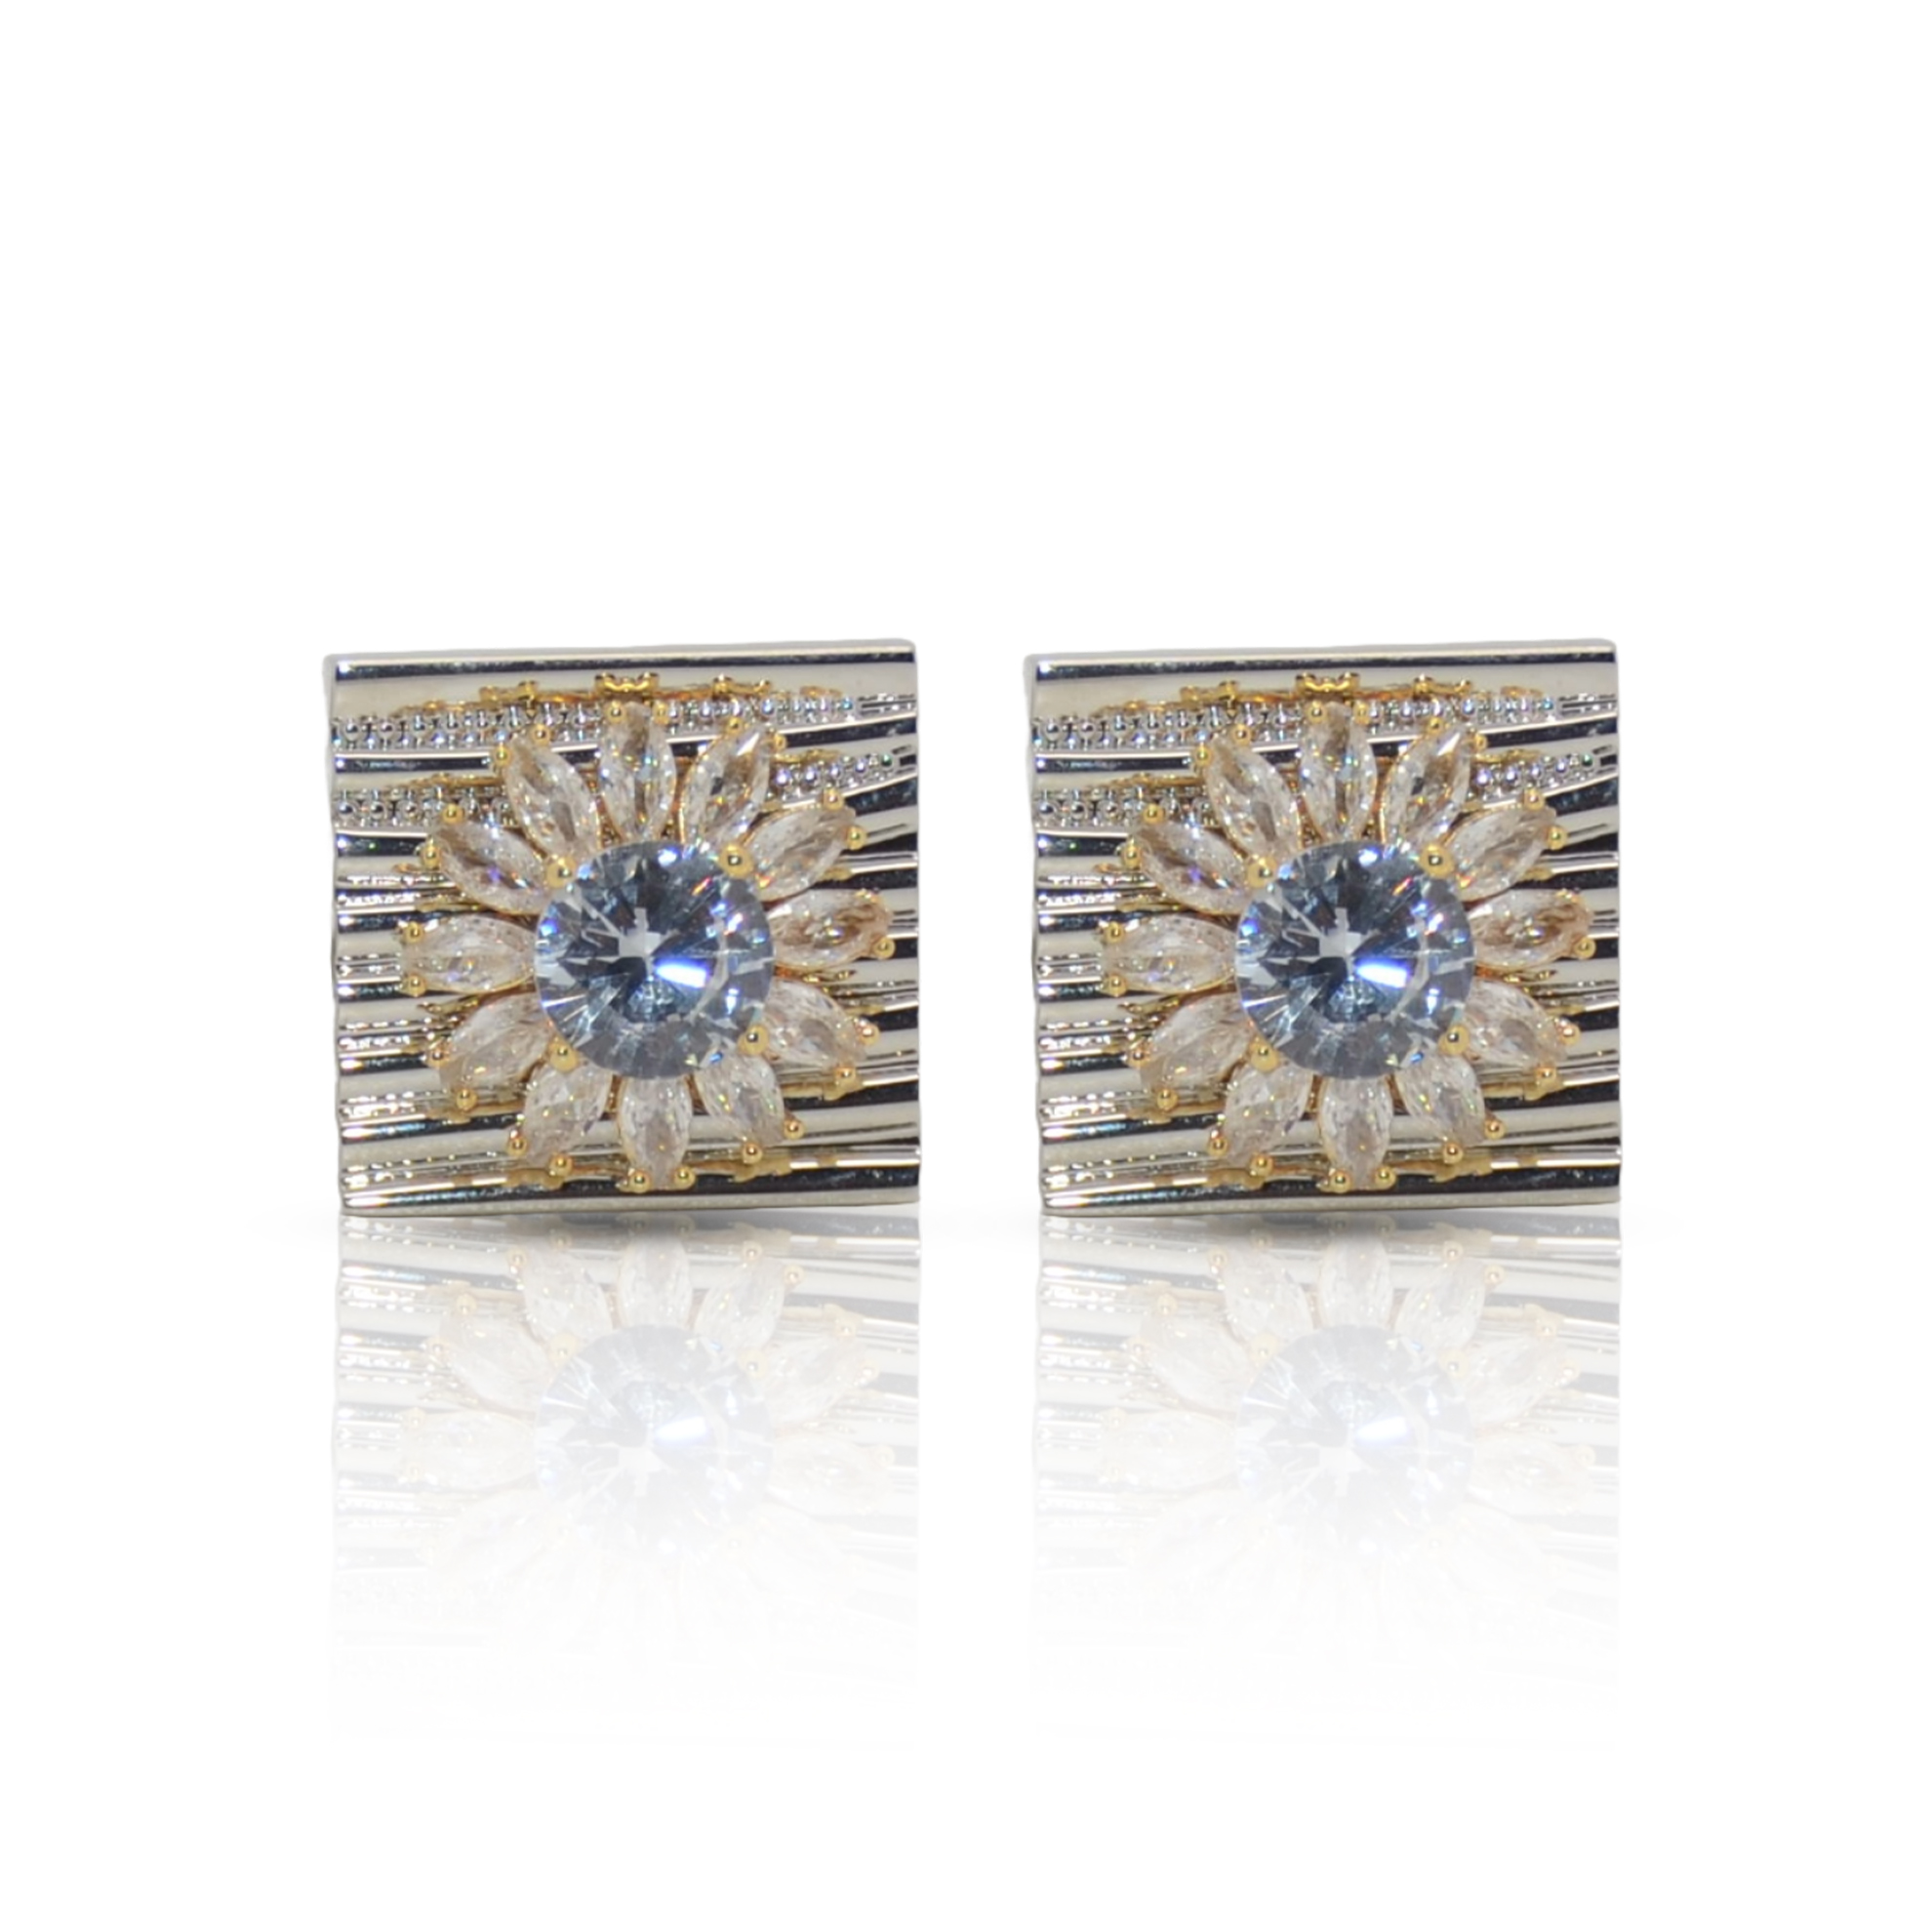 Cufflers Limited Edition Gold and Silver Box Cufflinks with Free Gift Box – CU-5001